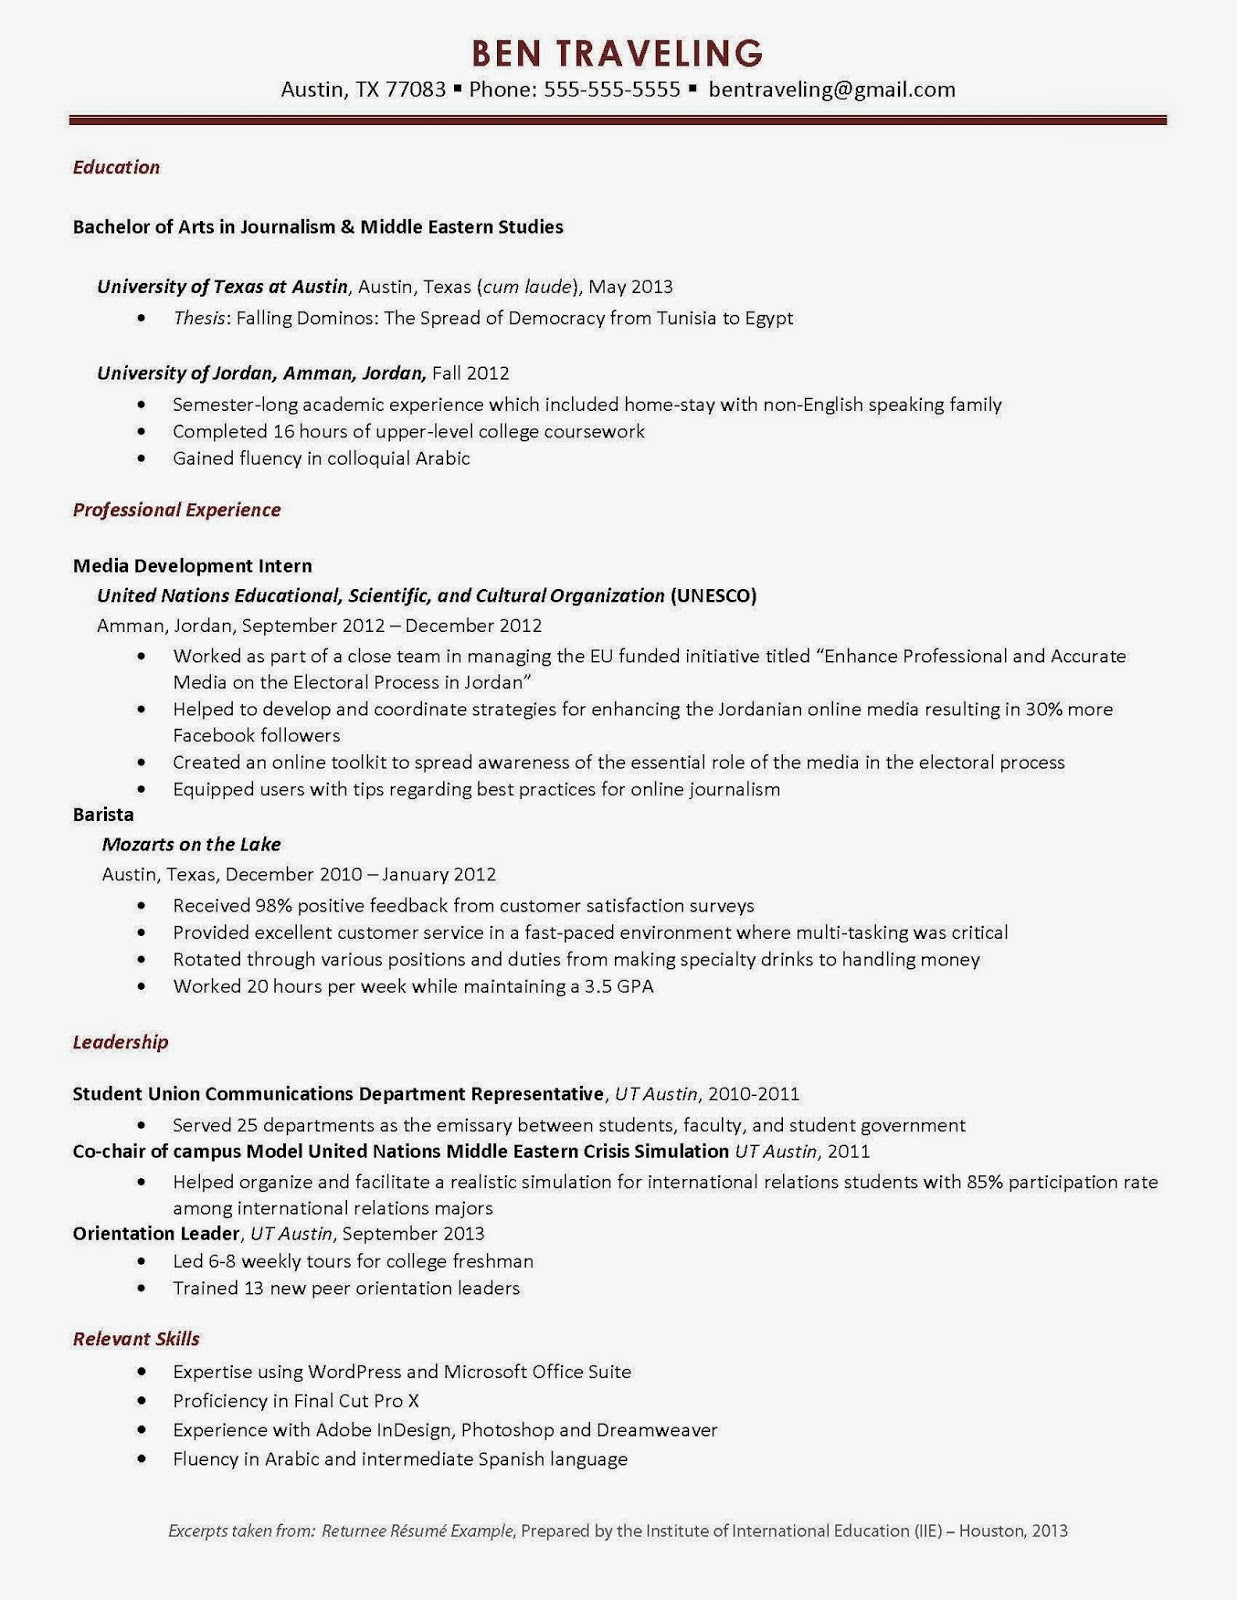 Sample Resume for Study Abroad Application University Of Arkansas Fice Of Study Abroad How Study